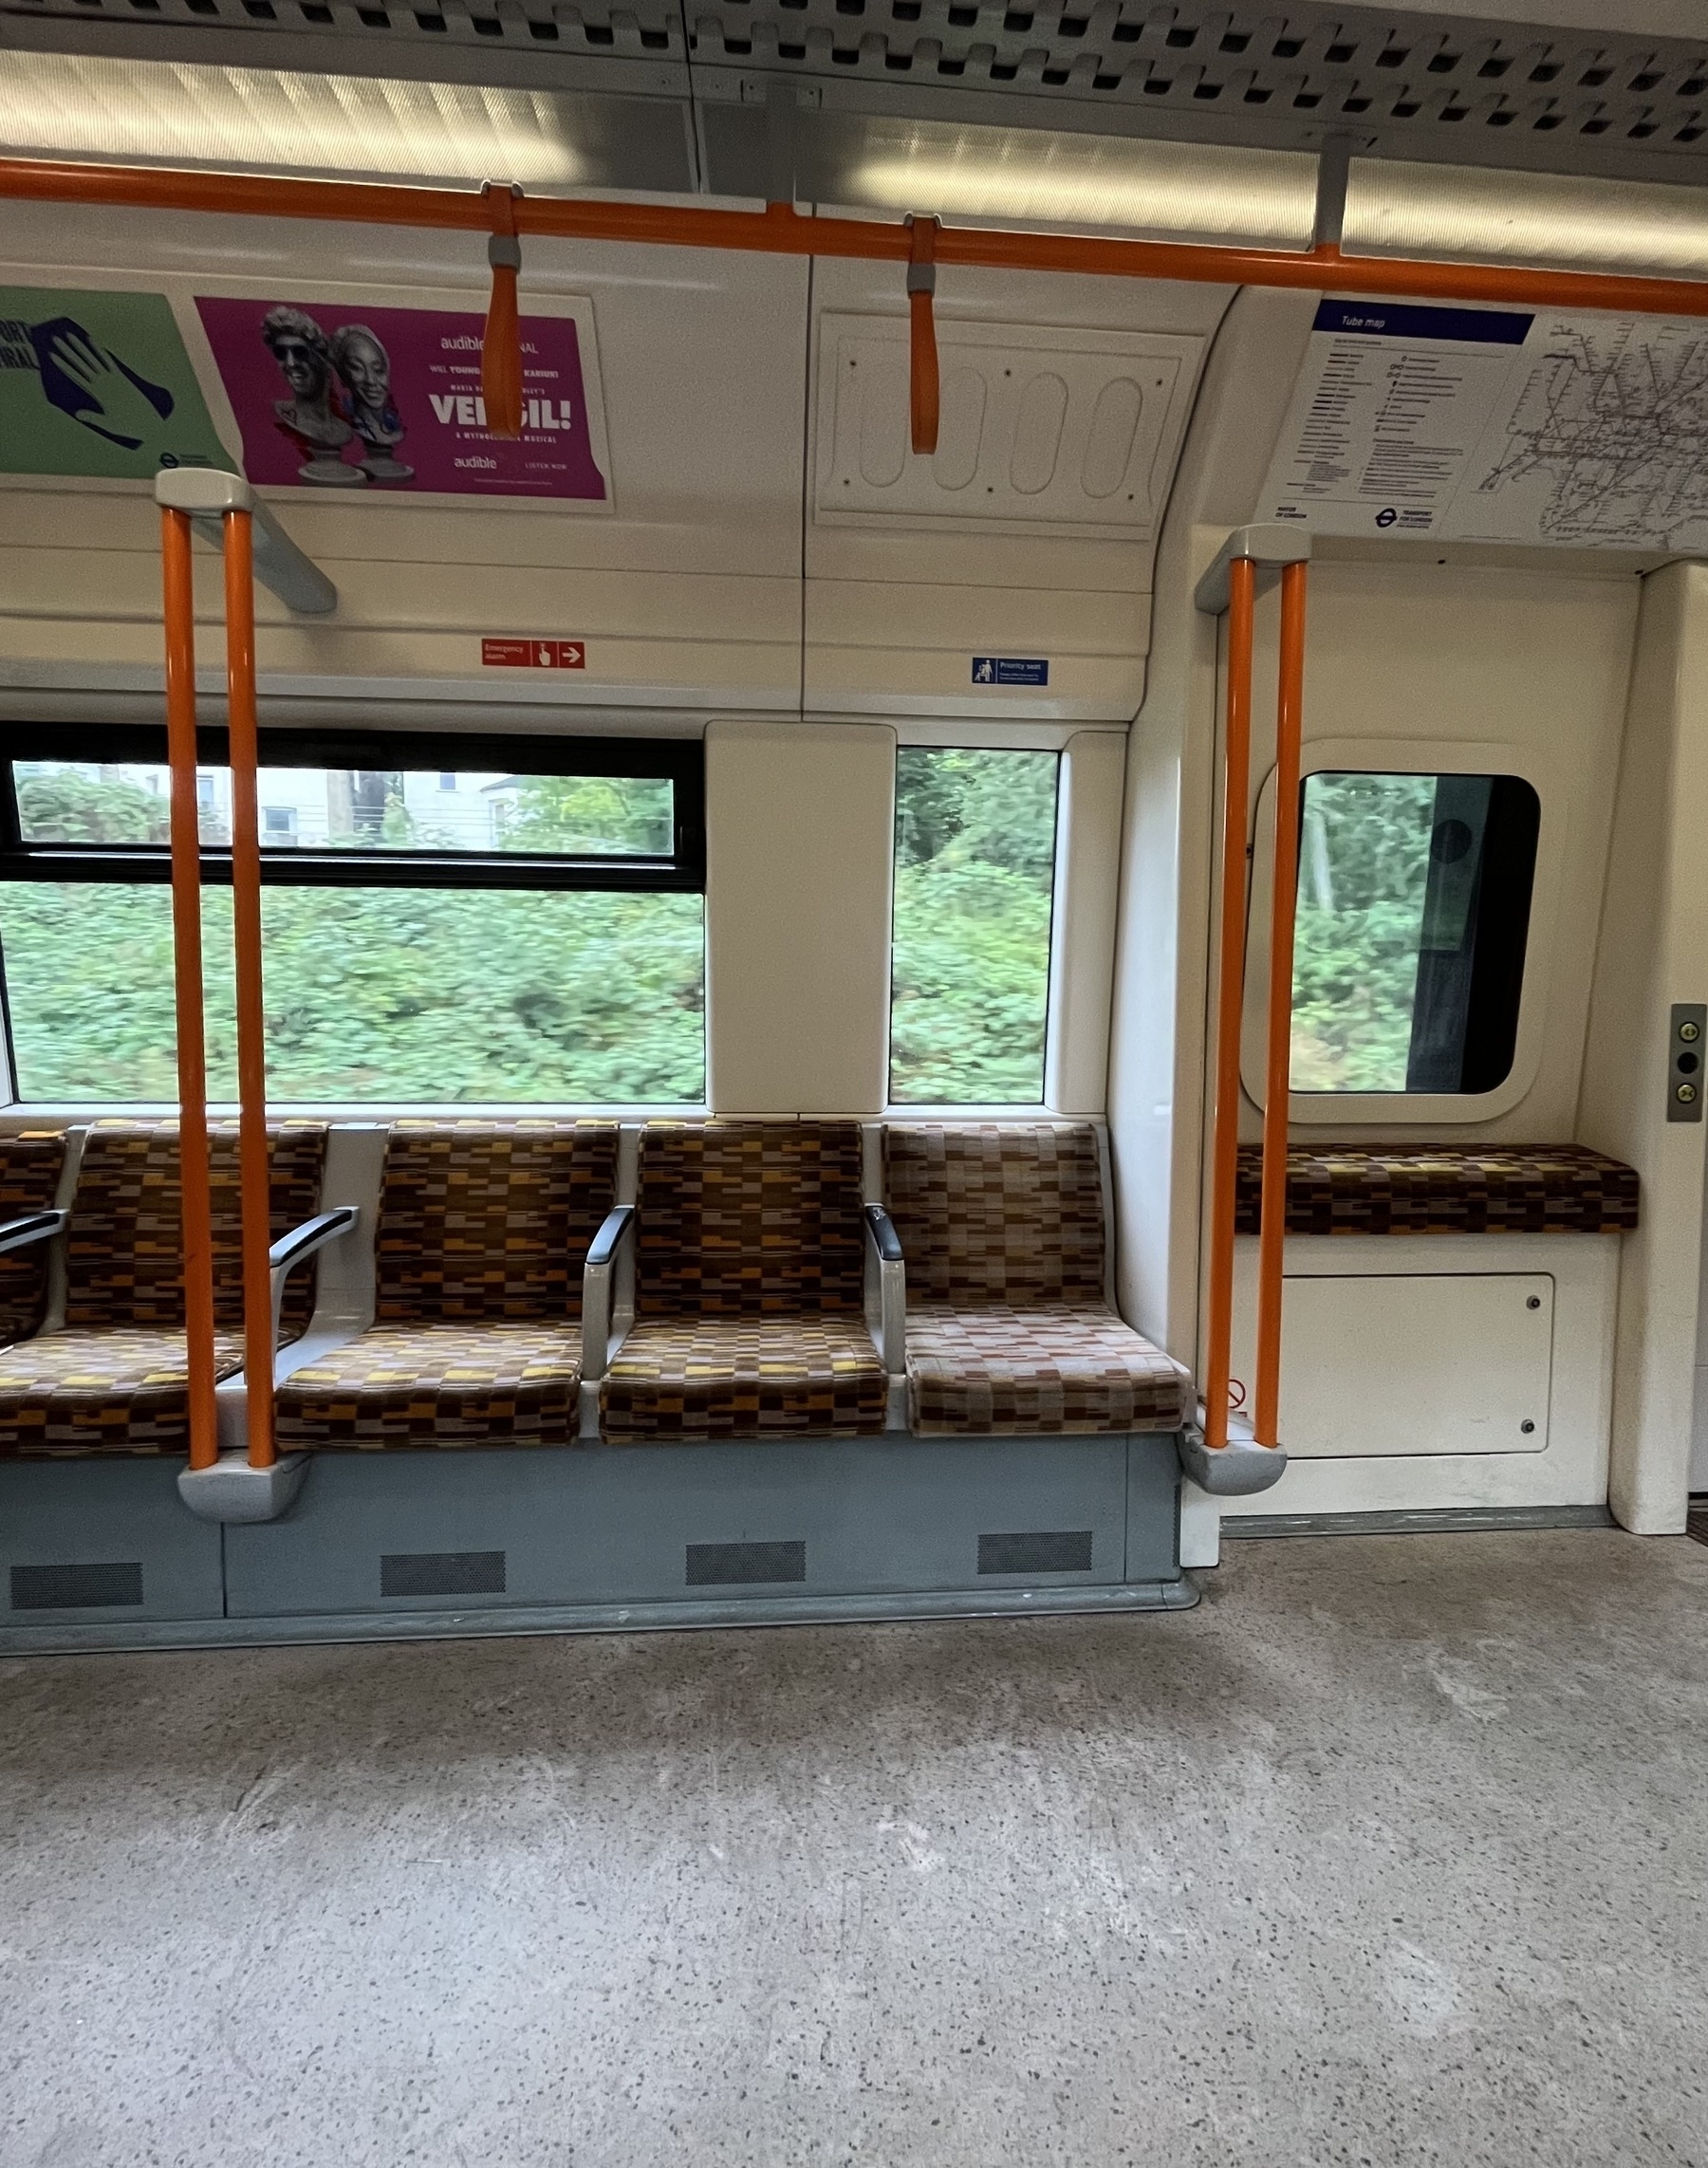 Row of empty seats in a overground train carriage, orange and brown seats, greenery out of the window 